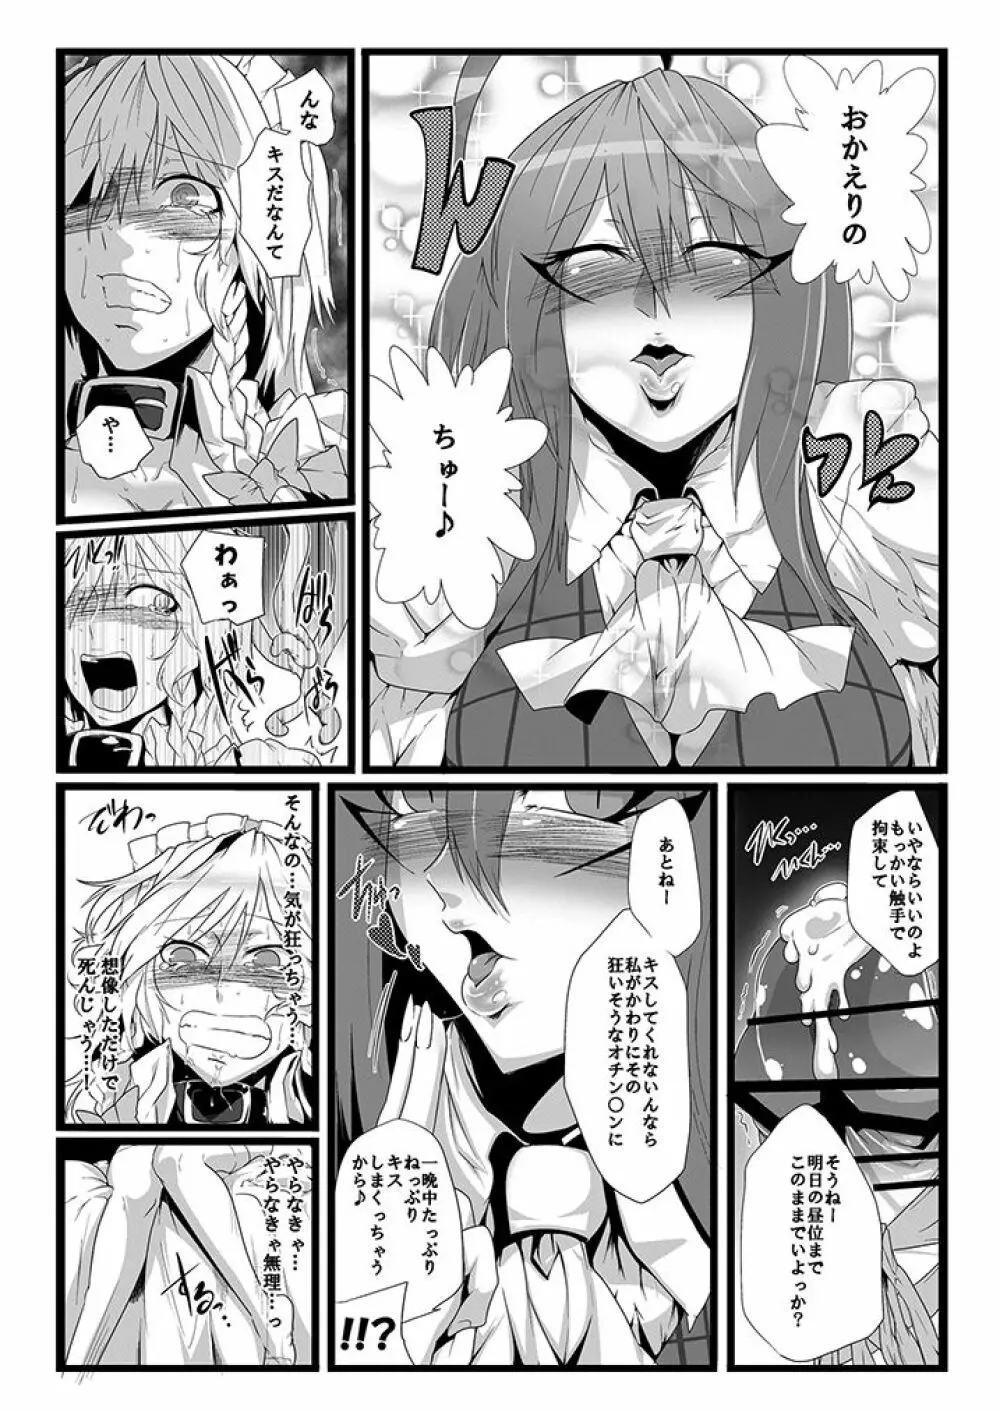 SAKUYA MAID in HEAVEN/ALL IN 1 - page256